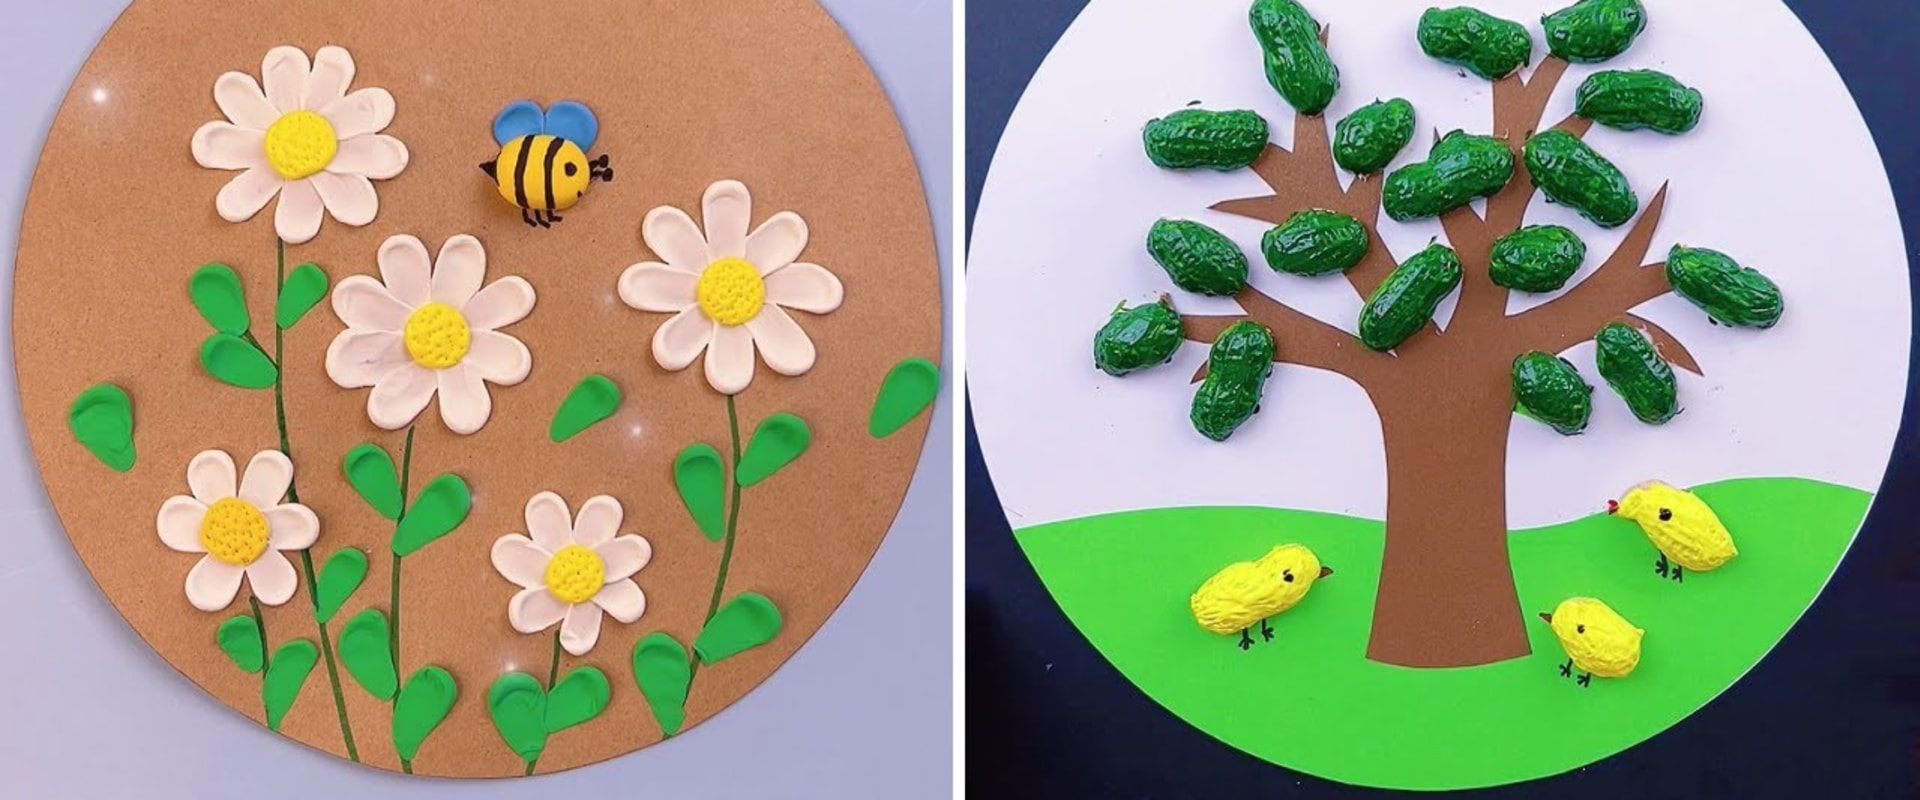 Painting Projects for Kids: Creative Craft Ideas